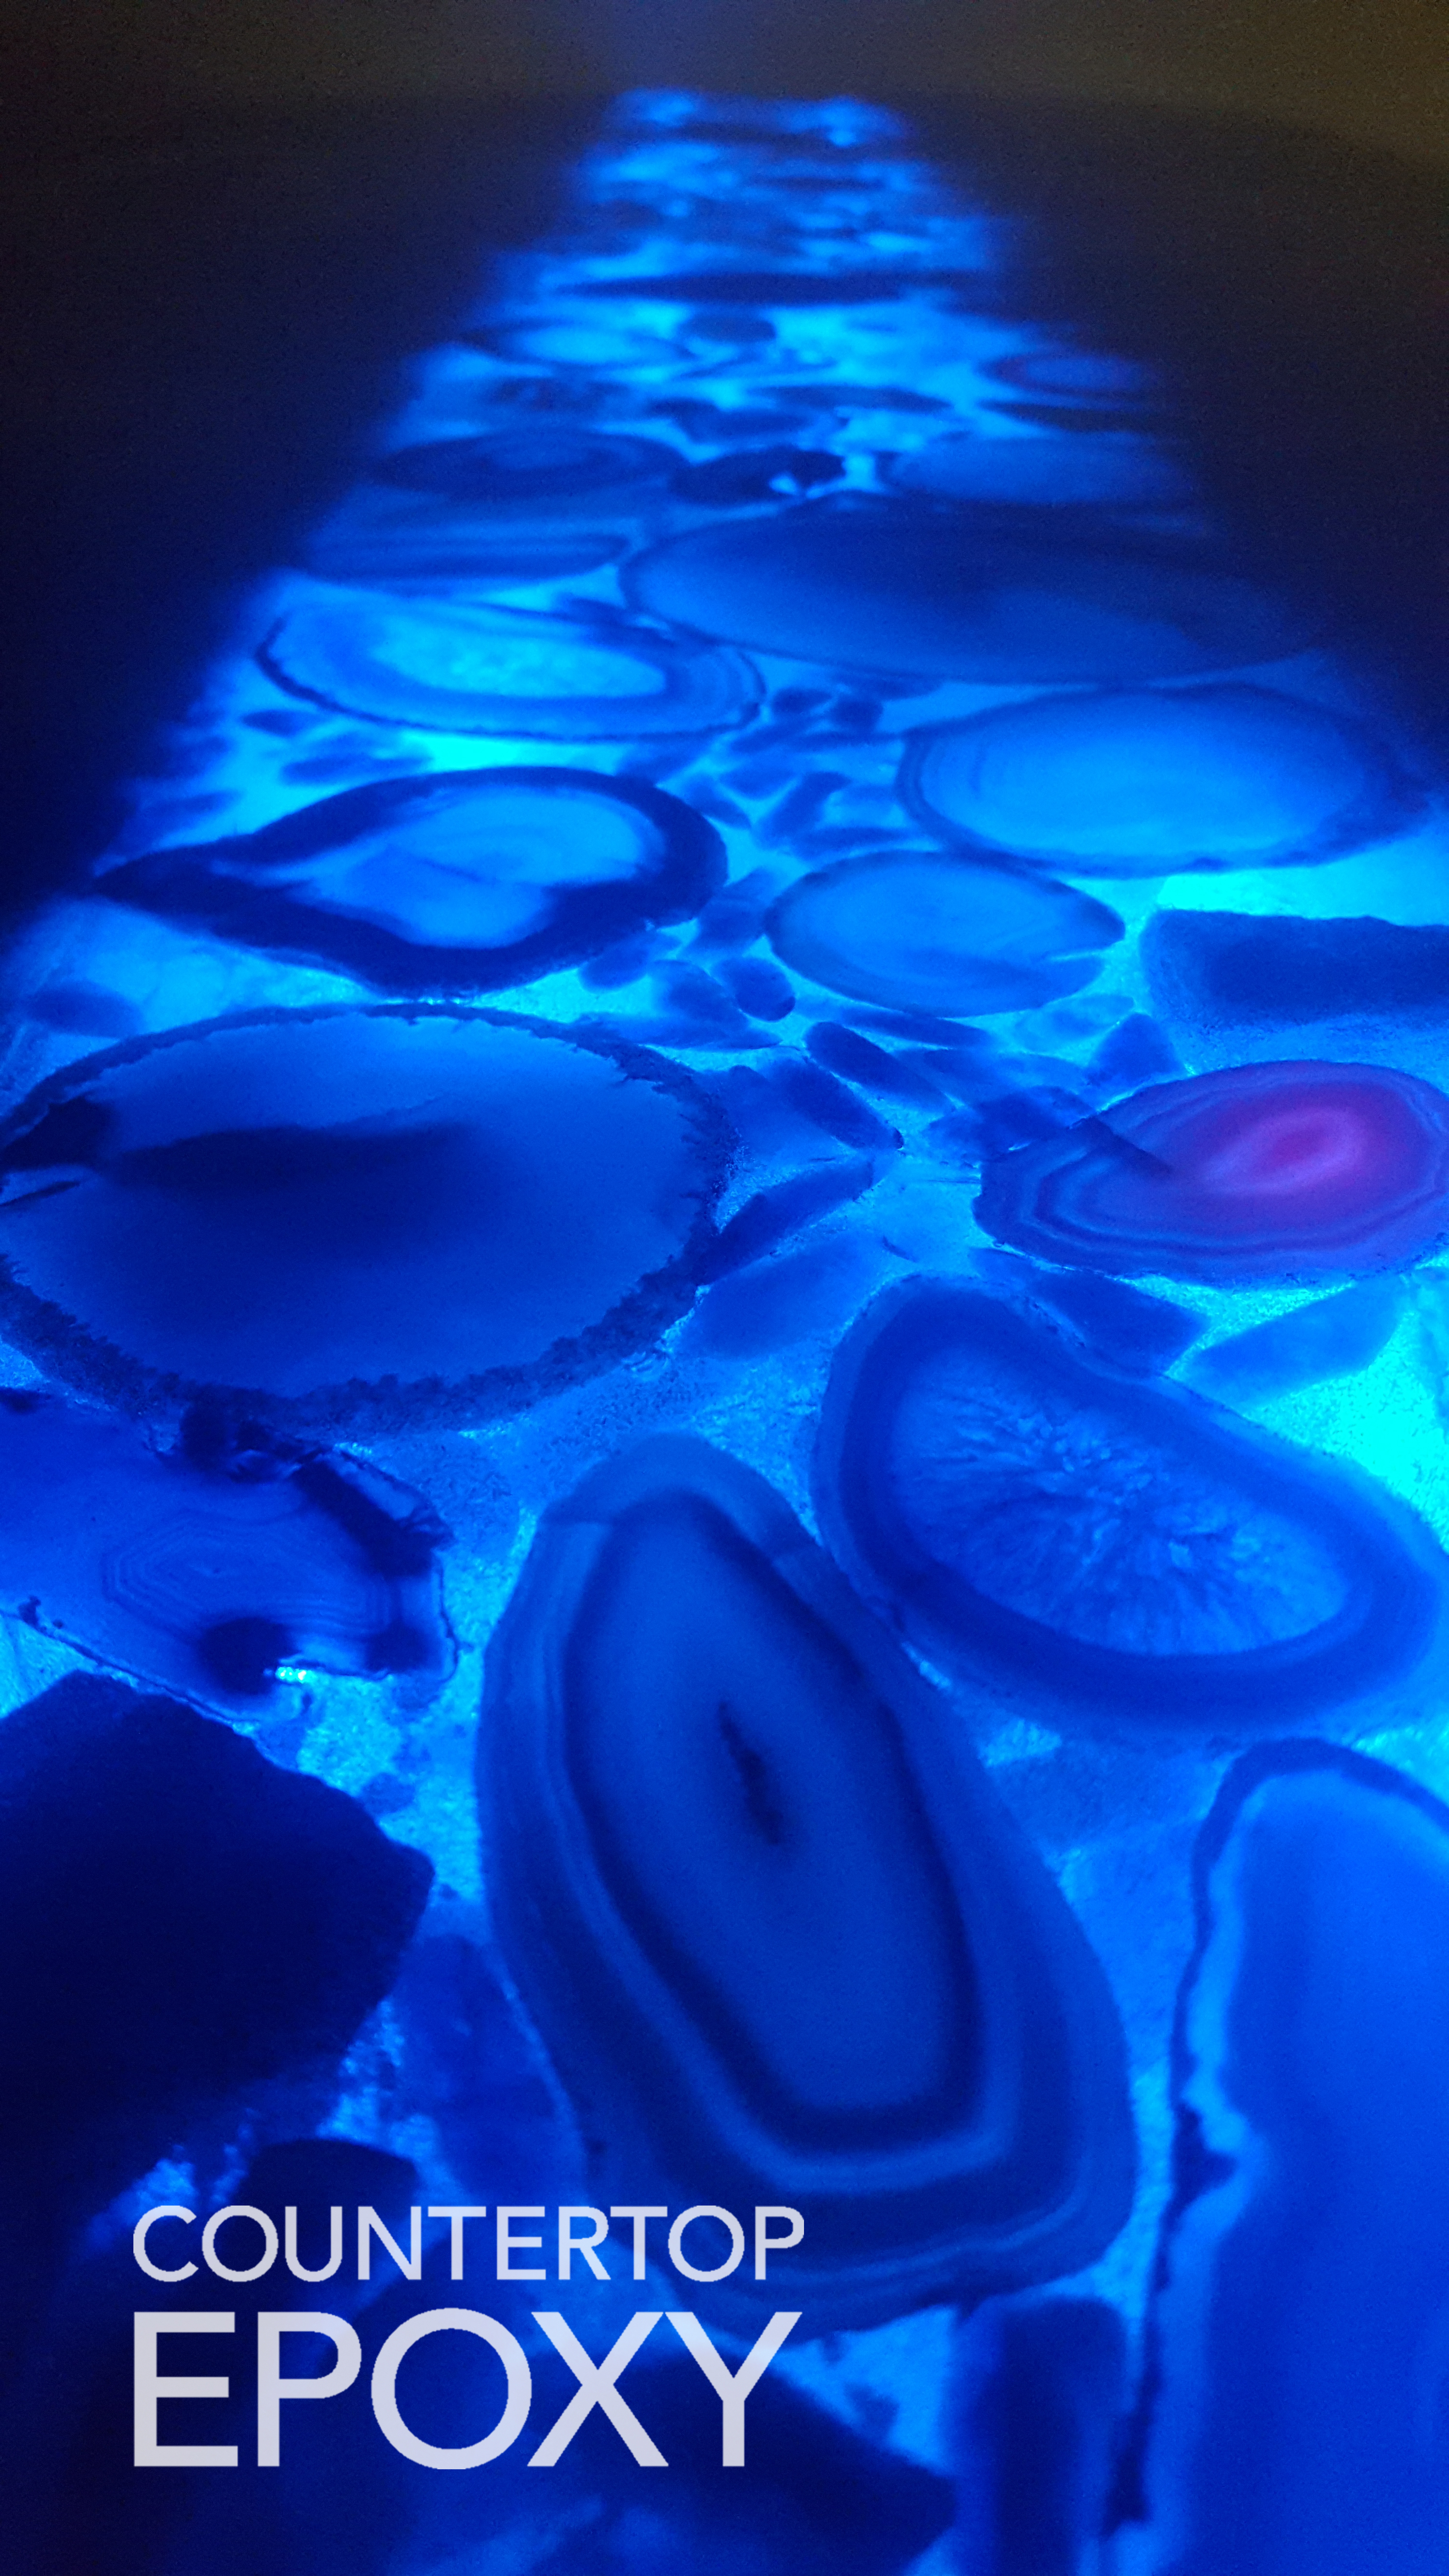 Geodes cast in FX Poxy epoxy with led lighting